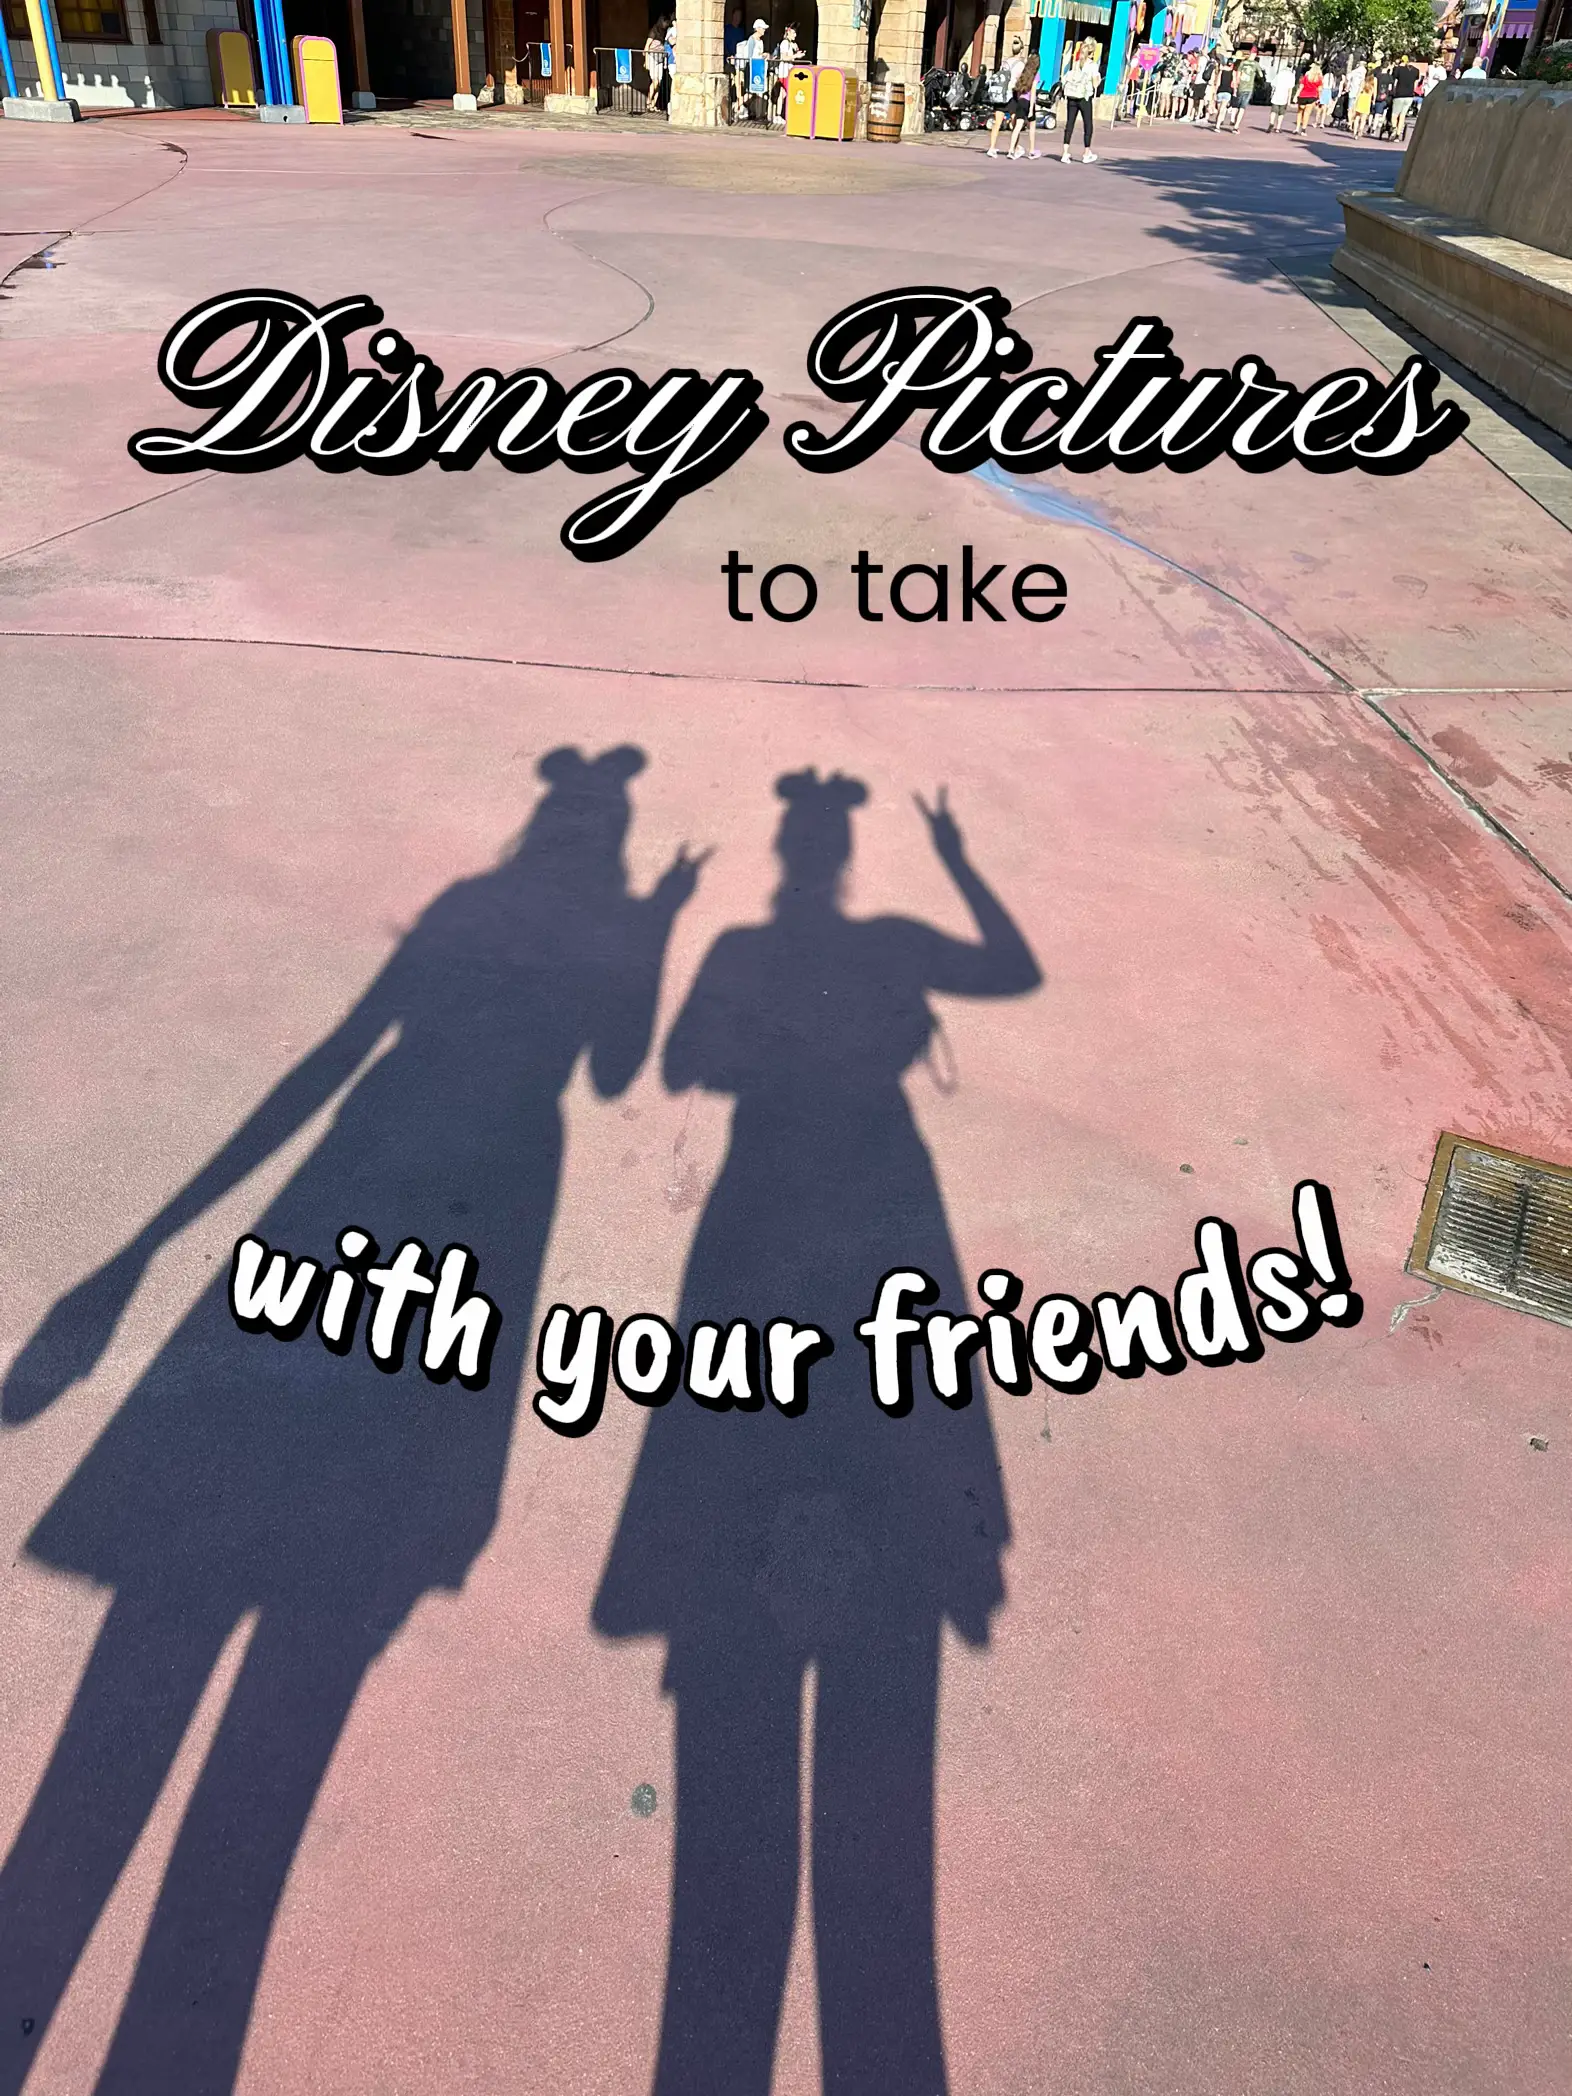  Three people are standing in front of a building, and their shadows are cast on the ground. The shadows are labeled with the words "Doney Pictures" and "to take with your friends!"